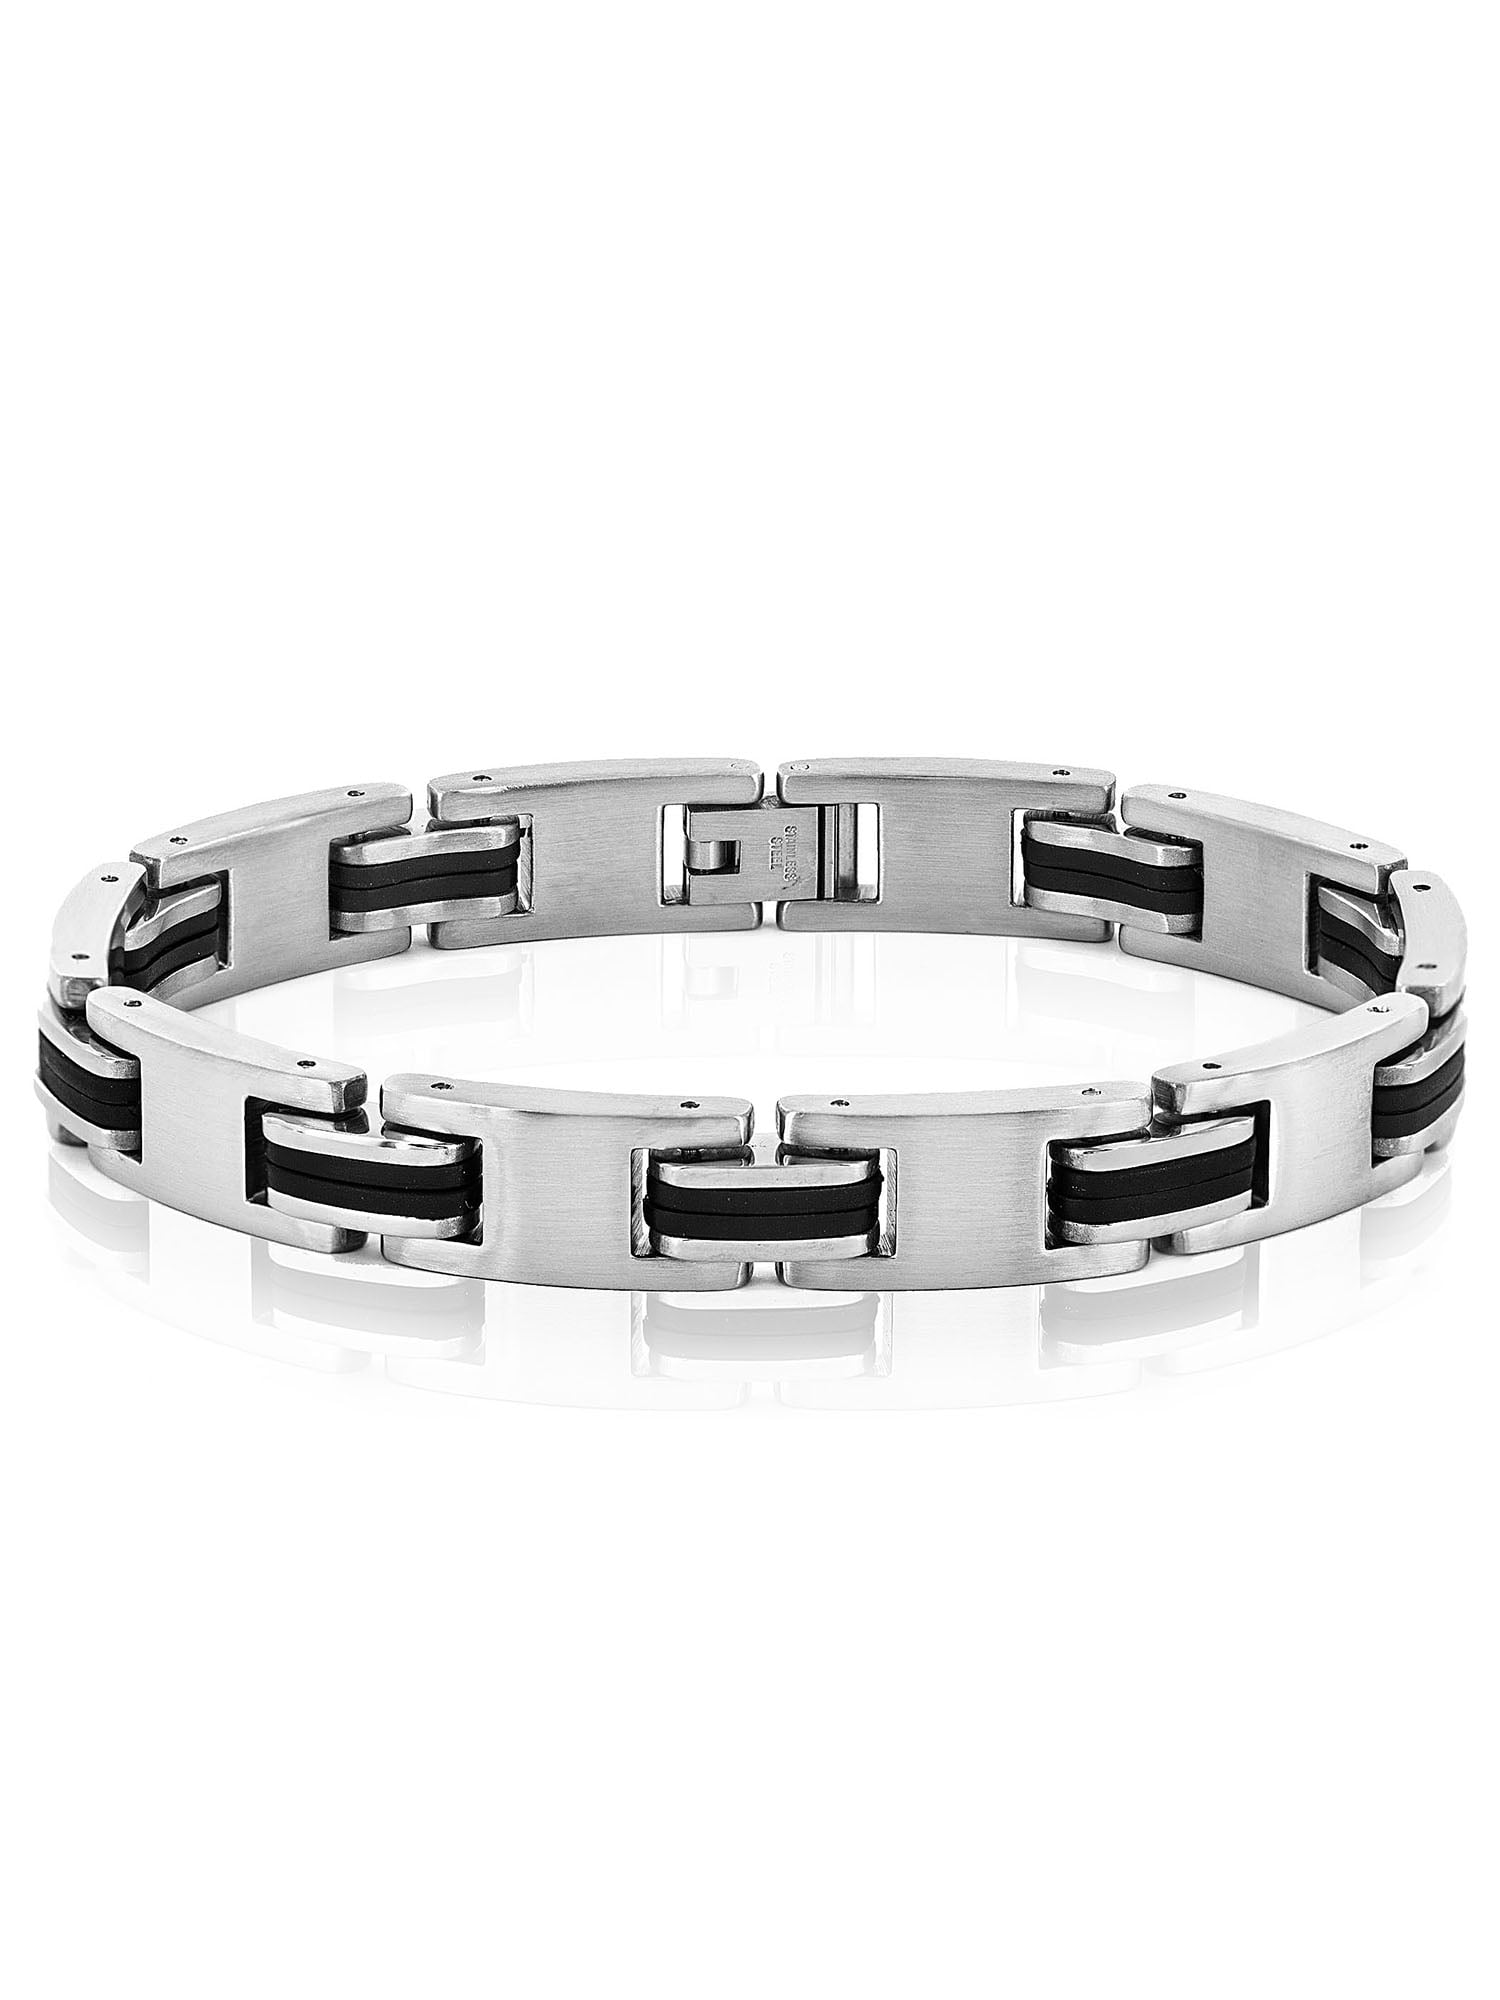 West Coast Jewelry Stainless Steel Black Rubber Identification Bracelet 8.5 inches 